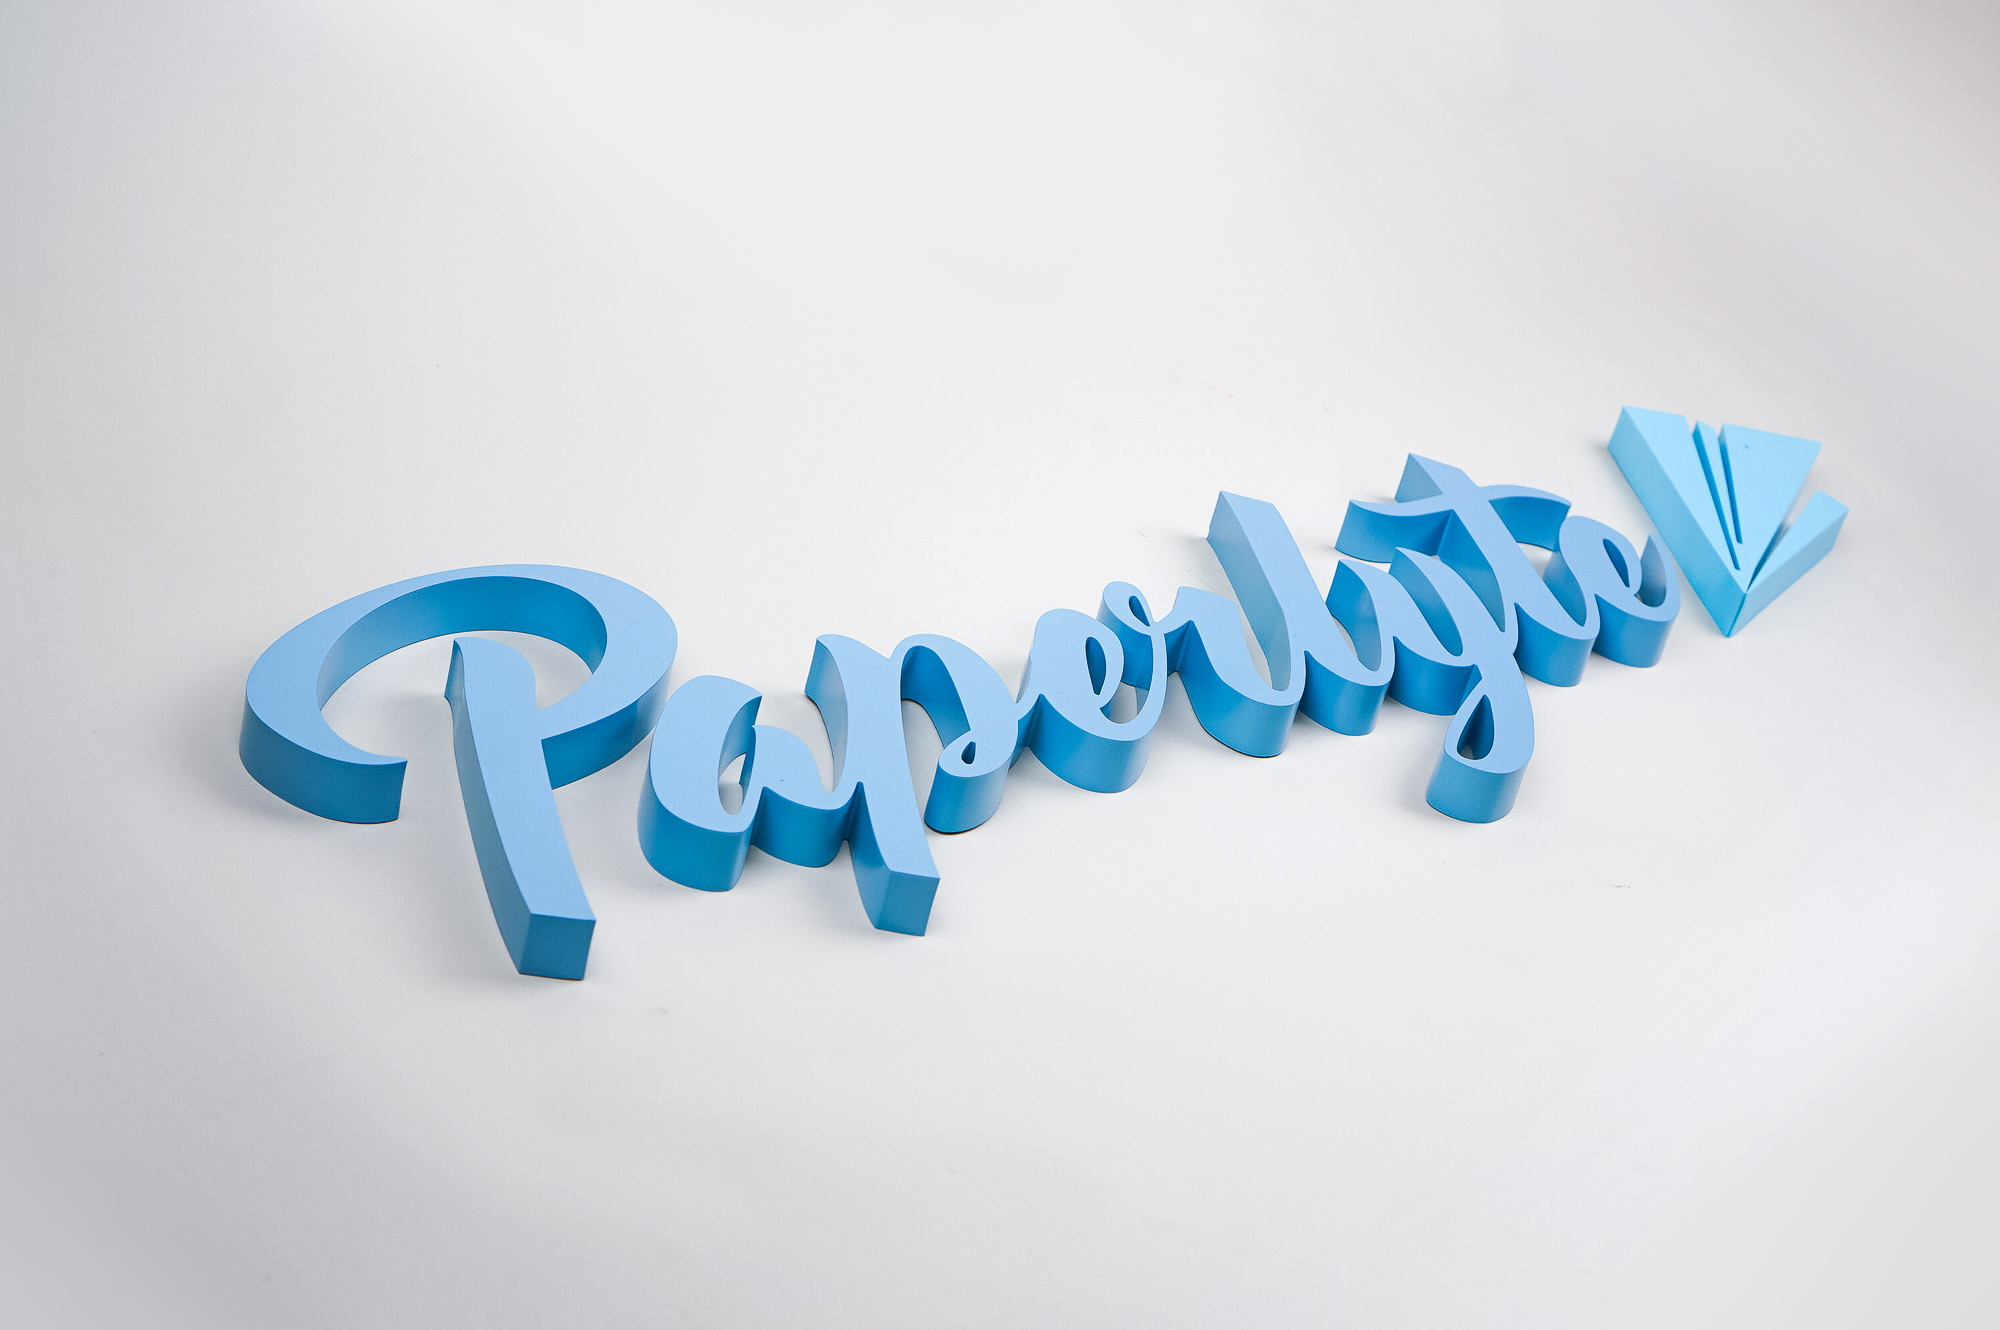 Blue dimensional script sign for Paperlyte, a media production company specializing in live streaming, video, documentary, and commercial content.